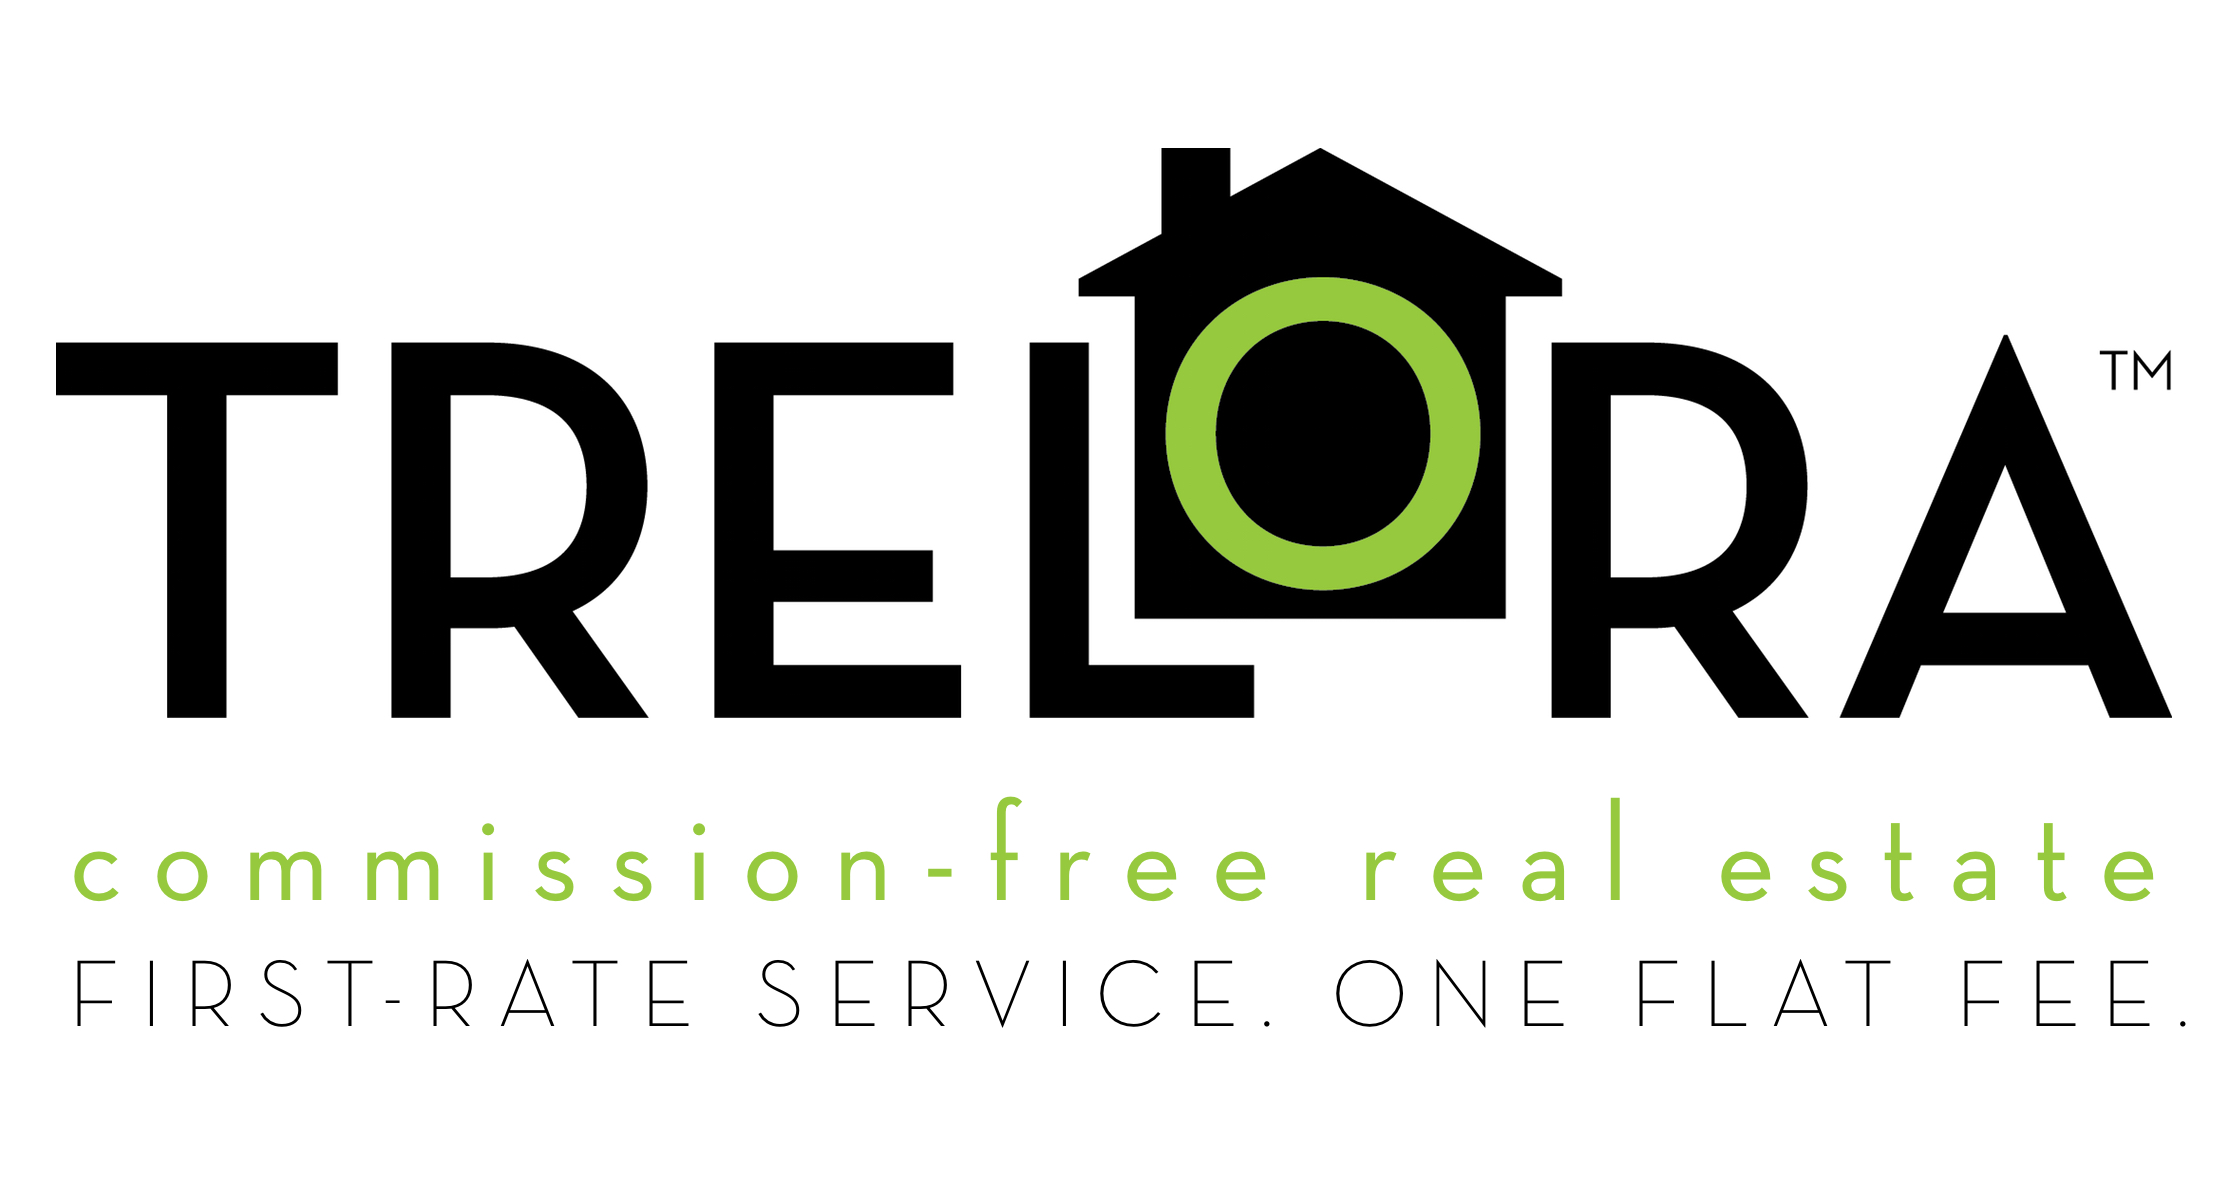 Commission-Free Real Estate.  First-Rate Service.  One Flat Fee.